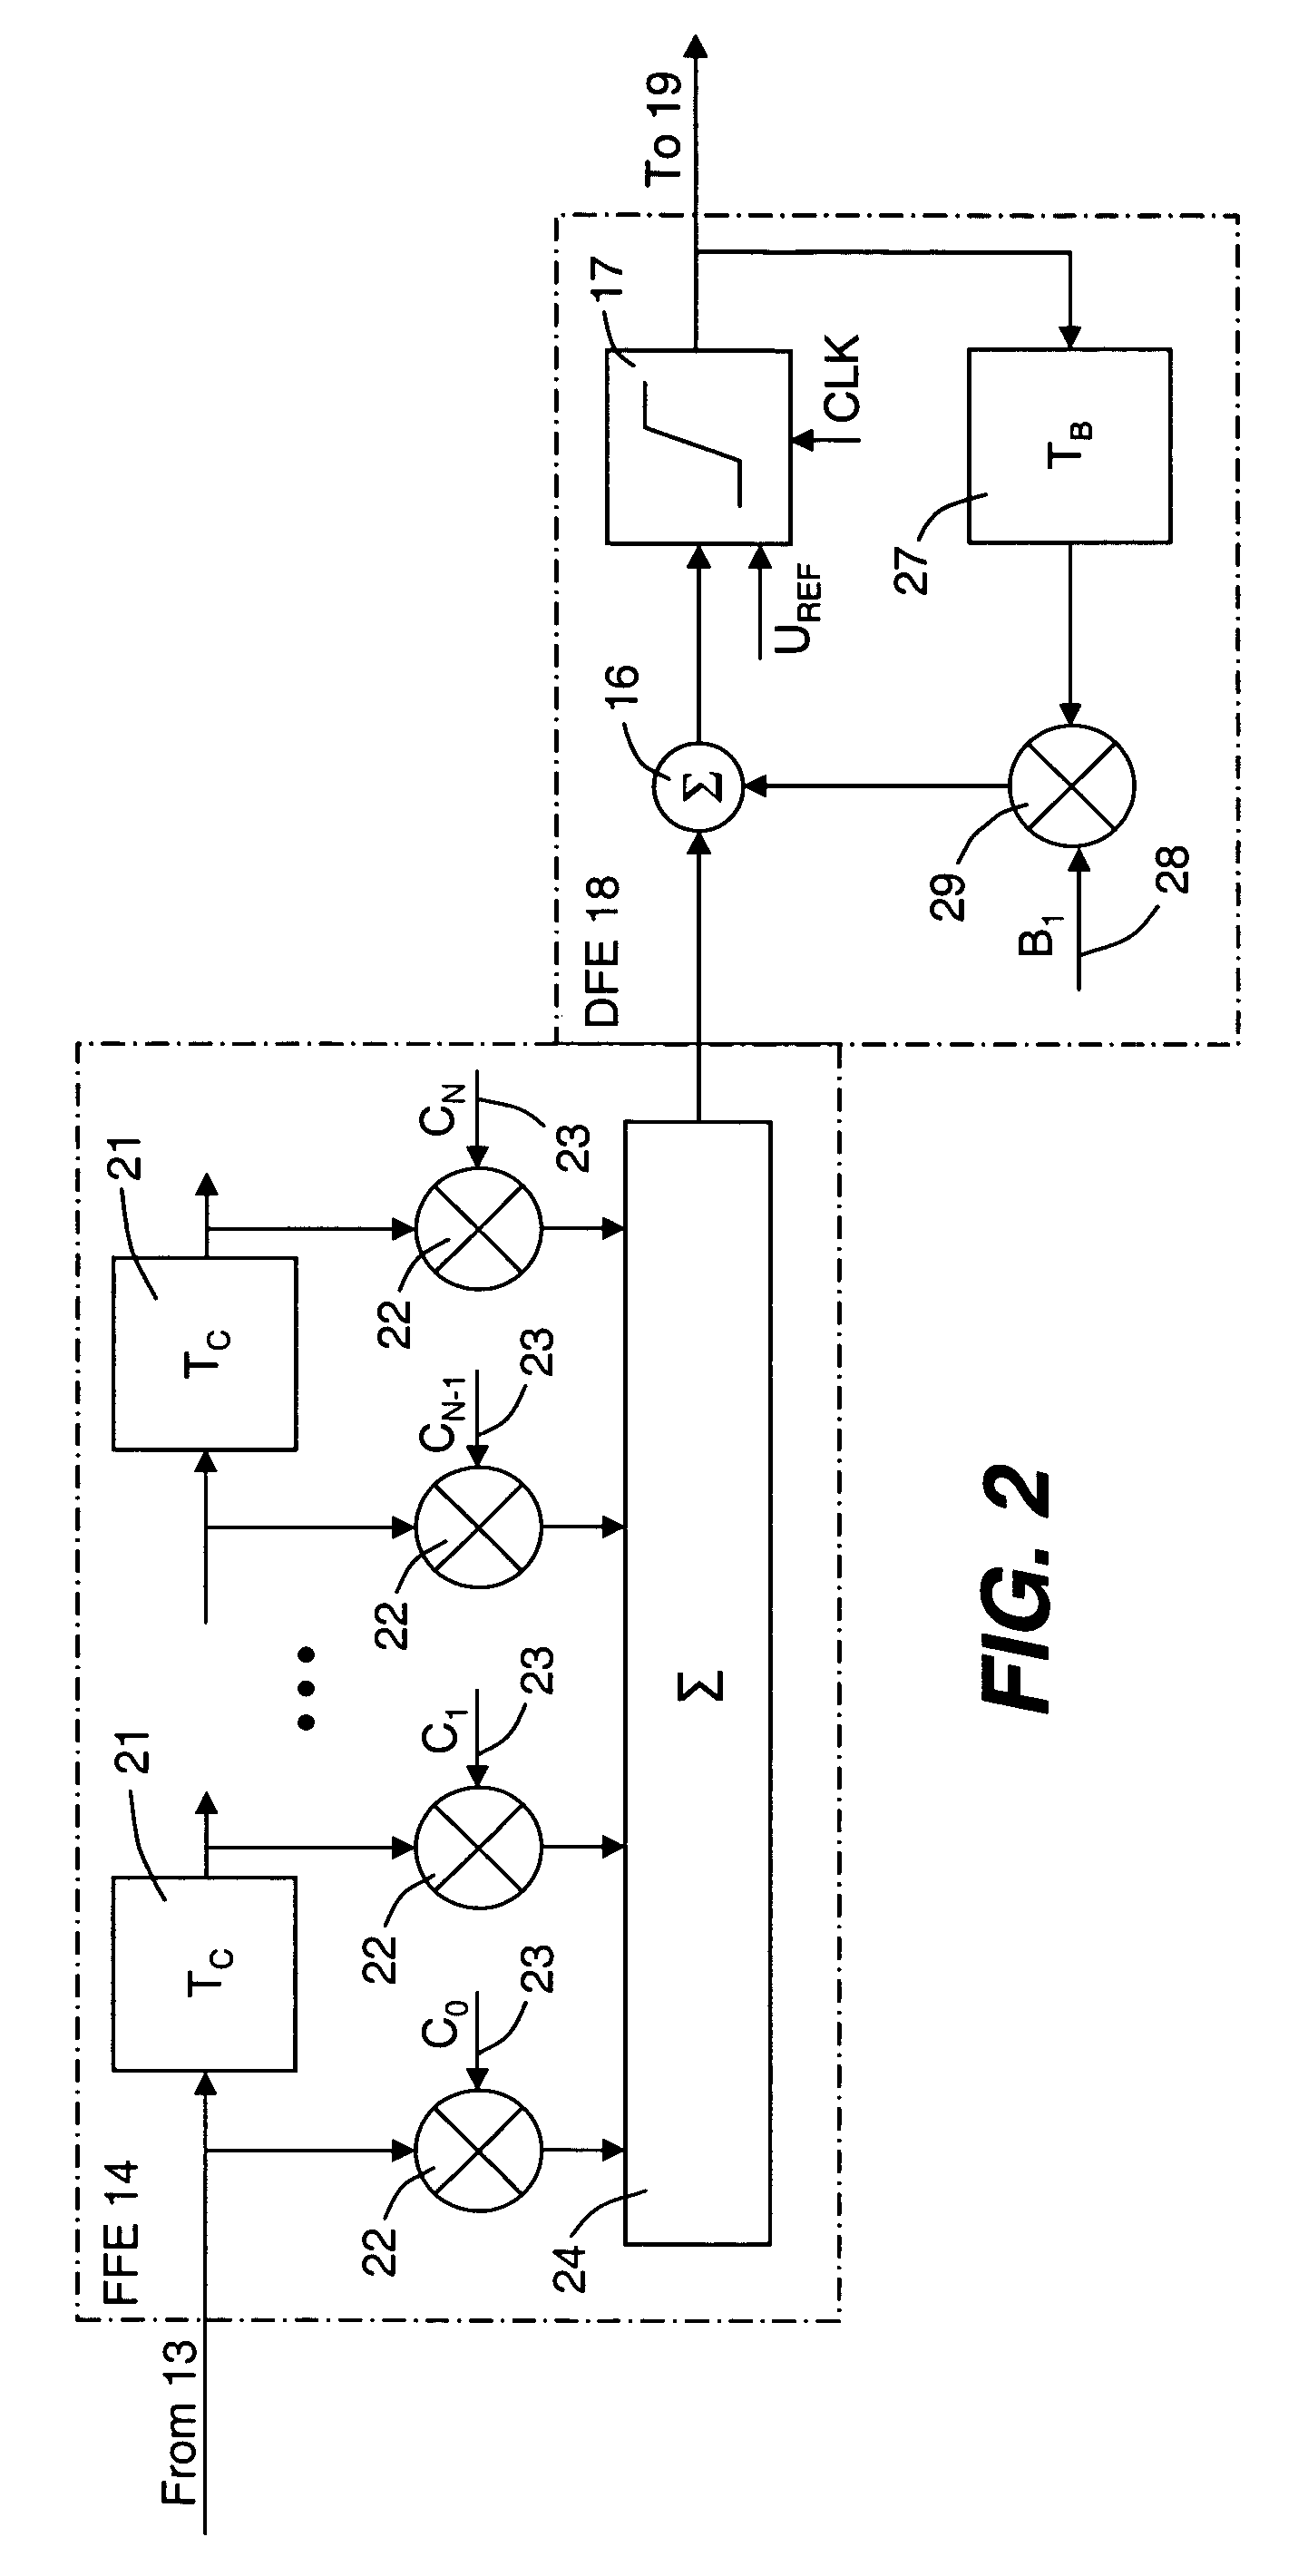 Pattern-dependent error counts for use in correcting operational parameters in an optical receiver